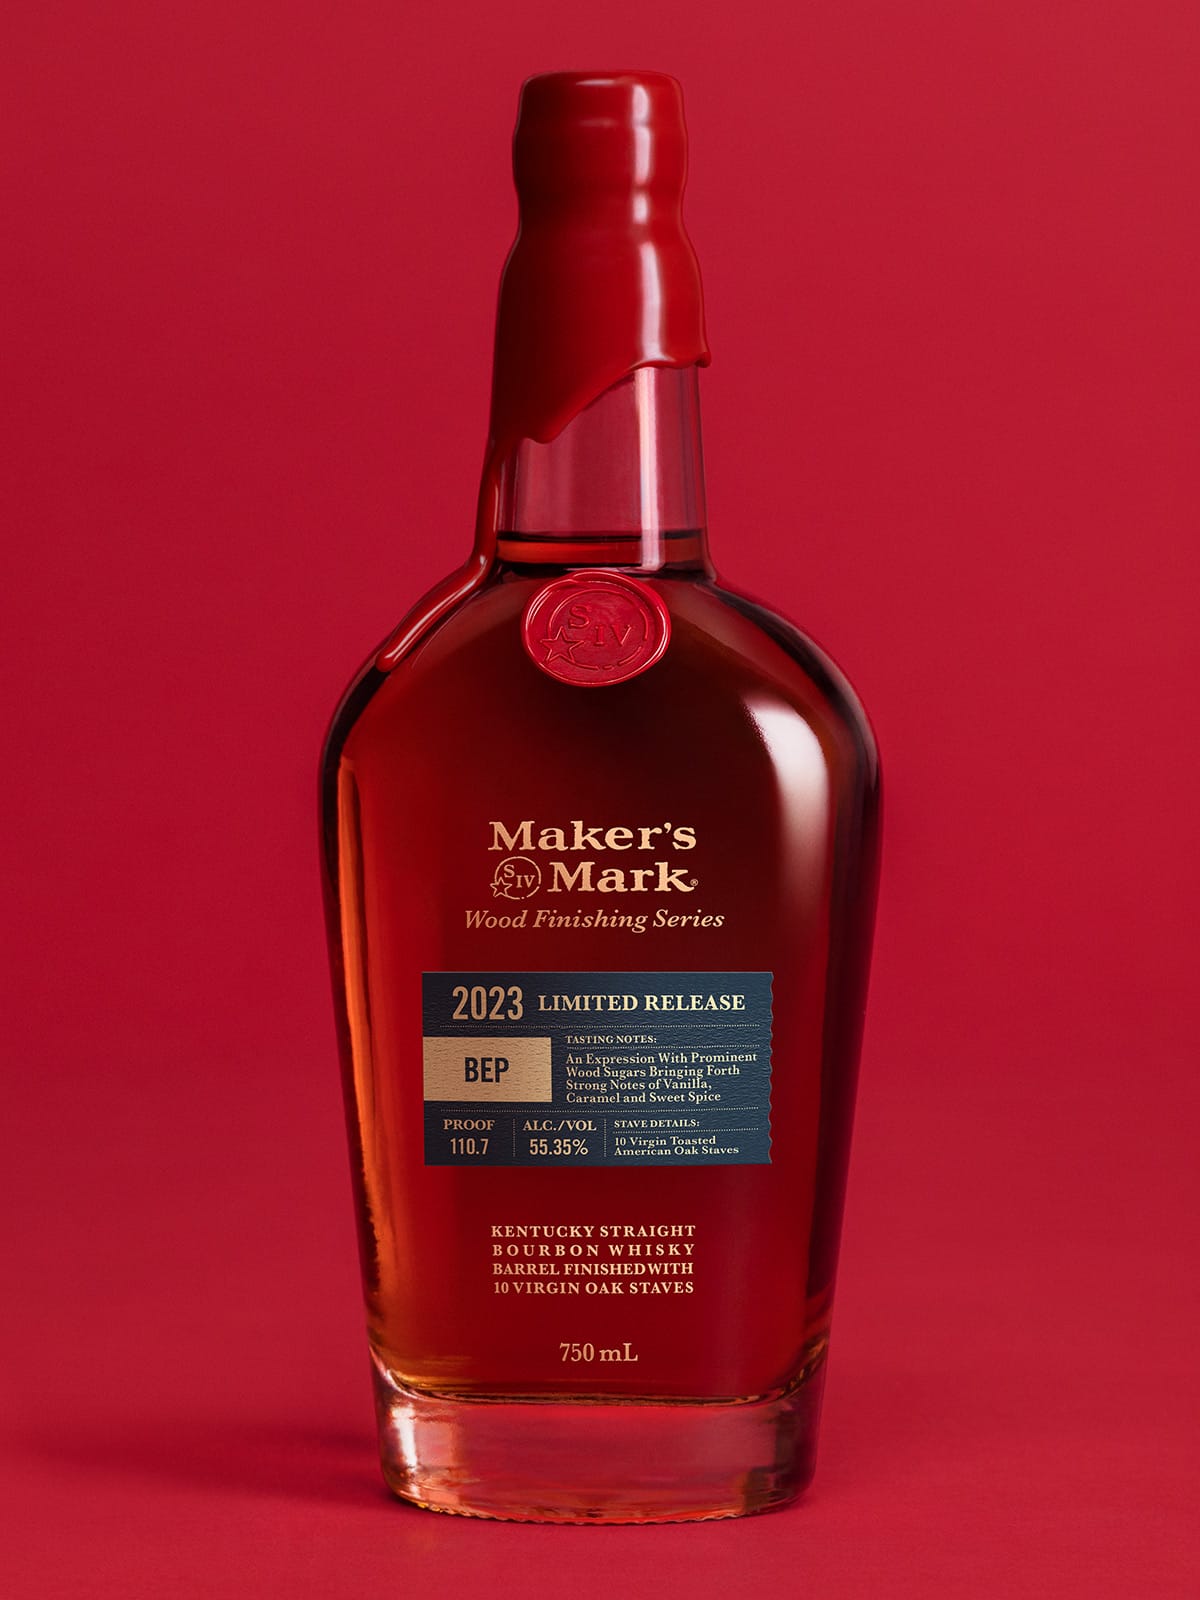 New Maker’s Mark Wood Finishing Series Explores Barrel Entry Proof